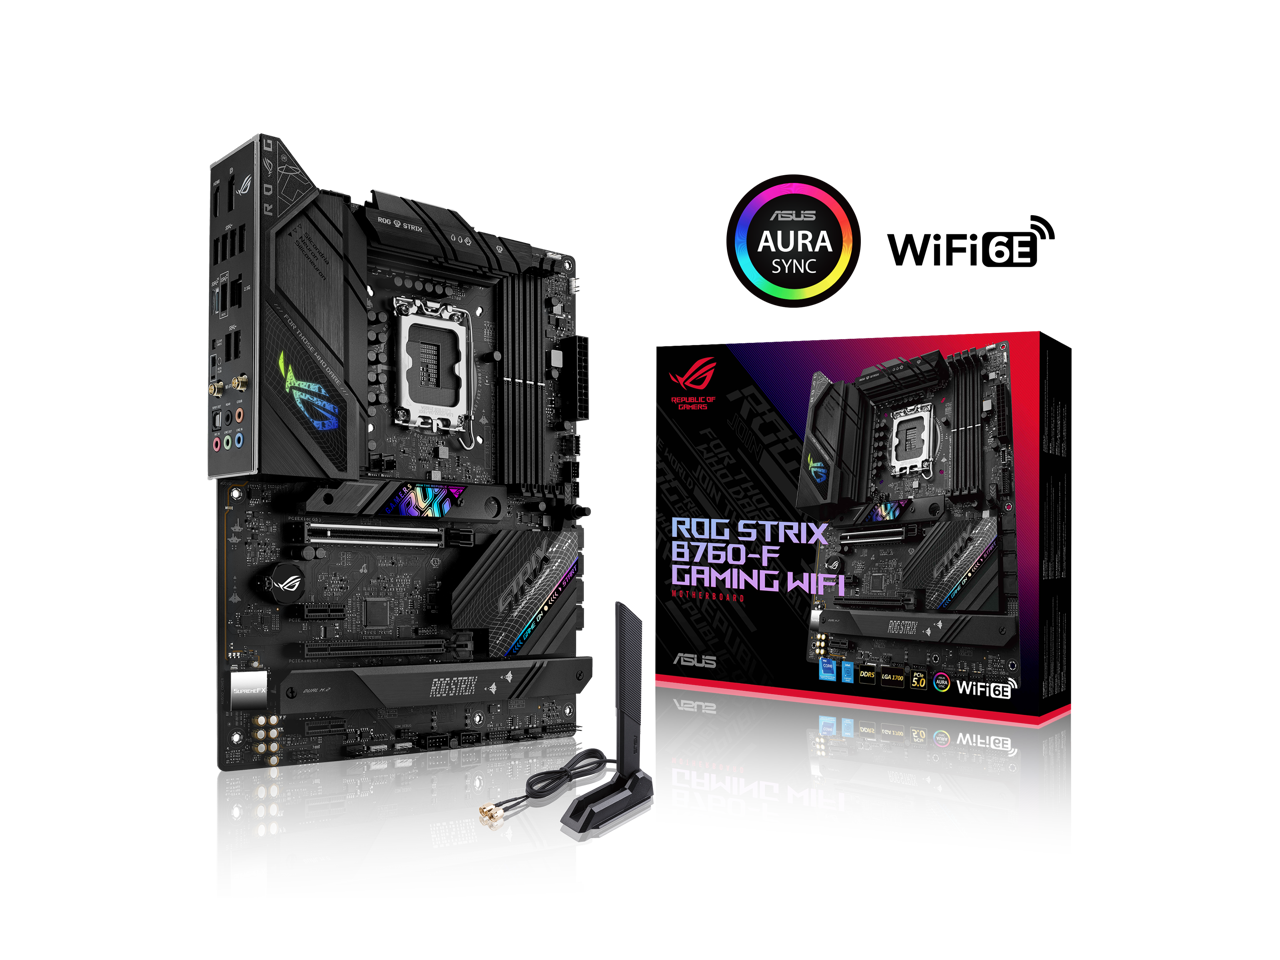 ASUS ROG Strix B760-F Gaming WiFi Intel B760(13th and 12th Gen) LGA 1700 ATX motherboard, 16 + 1 power stages, DDR5 up to 7800 MT/s, PCIe 5.0, three M.2 slots, WiFi 6E, USB 3.2 Gen 2x2 Type-C®, and Aura Sync RGB